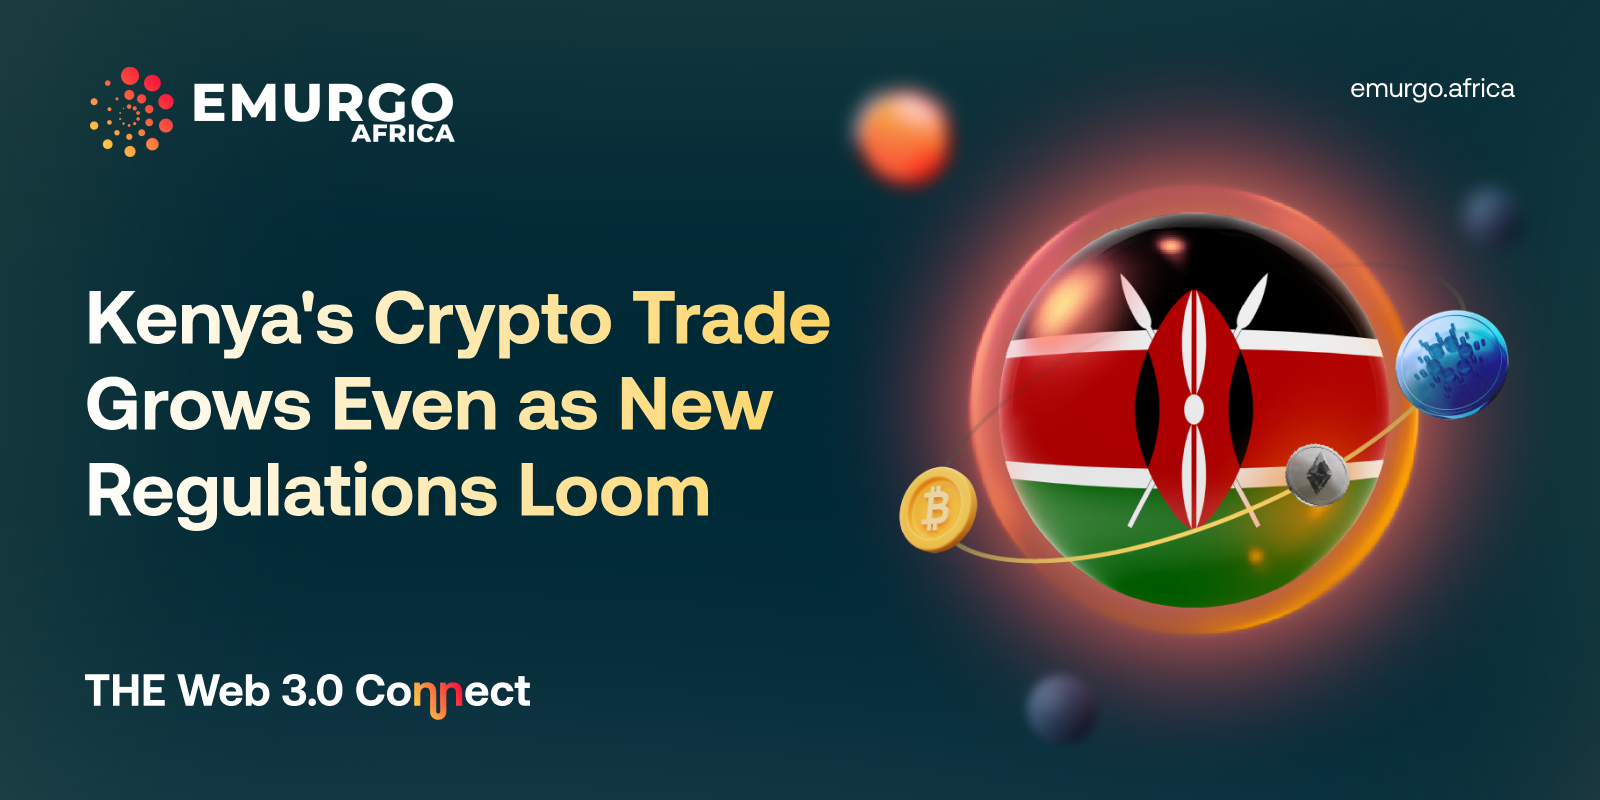 Kenya's Crypto Trade Grows Even as New Regulations Loom